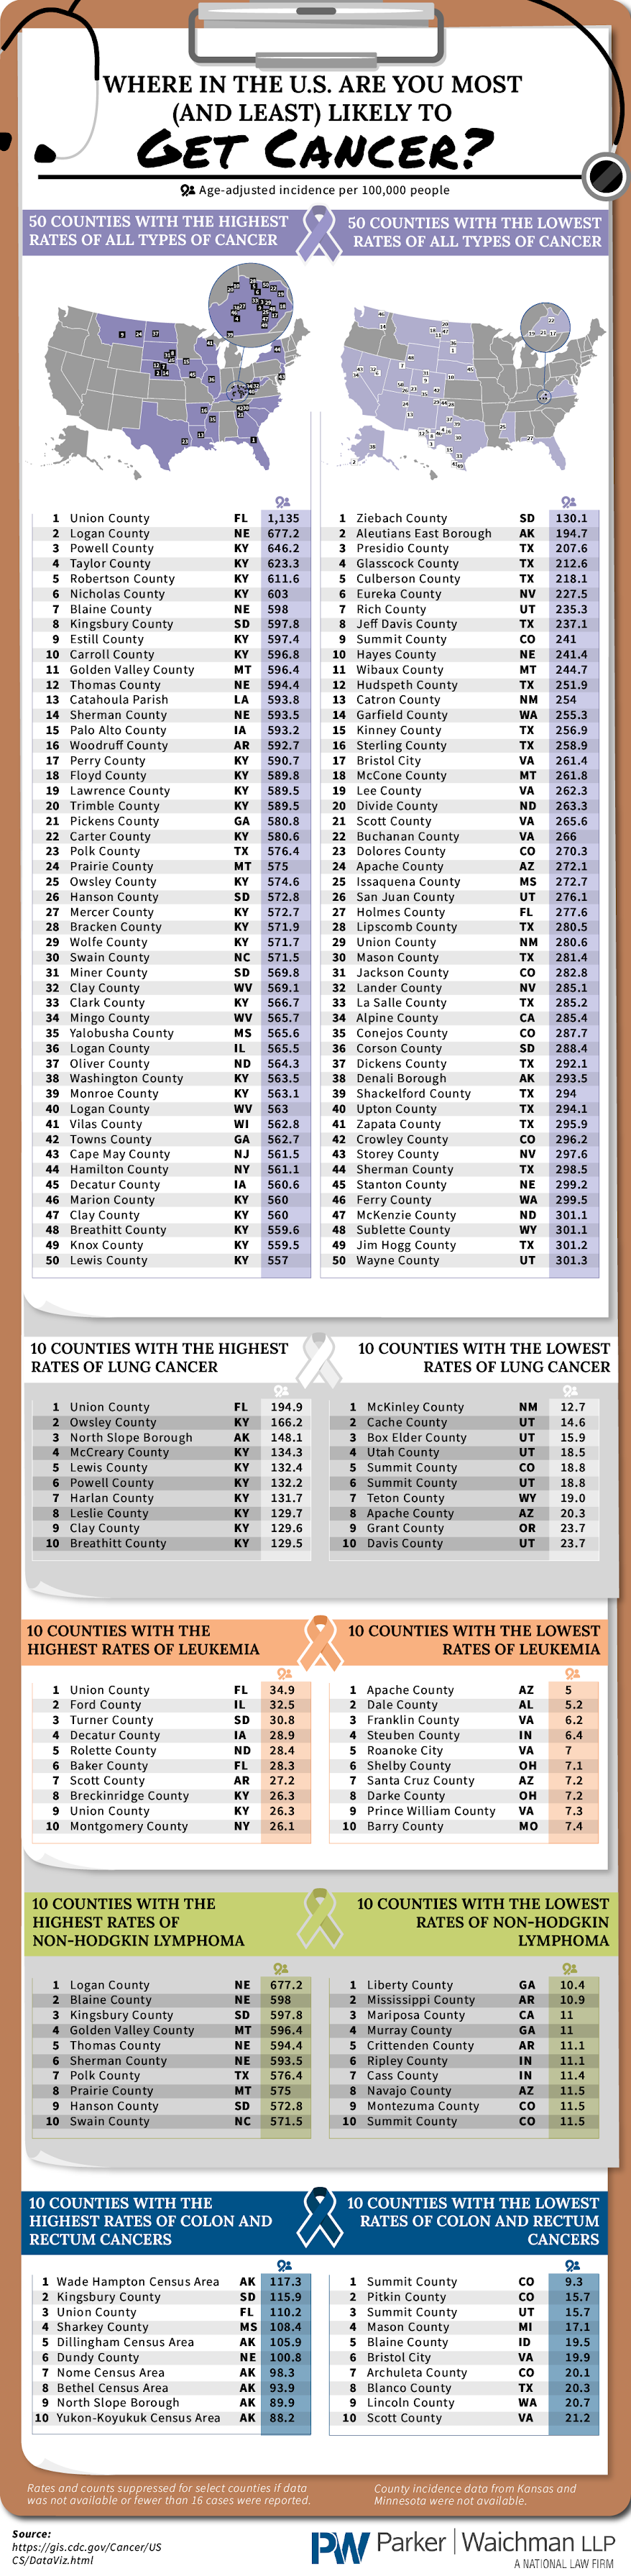 Where In The U.S. Are You Most (And Least) Likely To Get Cancer? #infographic